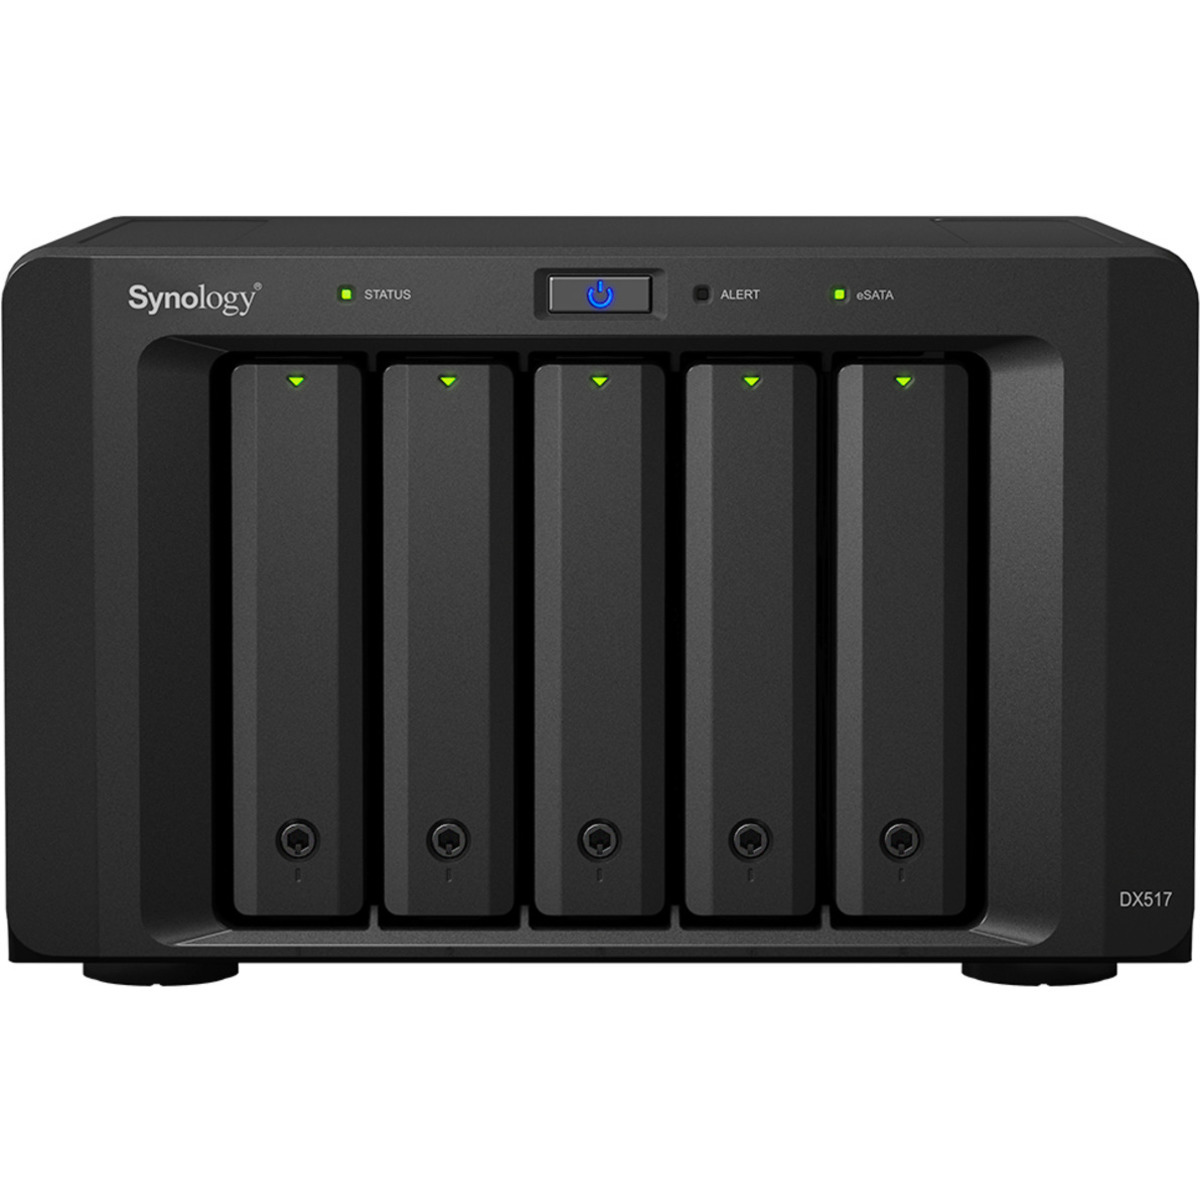 buy $2208 Synology DX517 80tb Desktop Expansion Enclosure 5x16000gb Toshiba Enterprise Capacity MG08ACA16TE 3.5 7200rpm SATA 6Gb/s HDD ENTERPRISE Class Drives Installed - Burn-In Tested - nas headquarters buy network attached storage server device das new raid-5 free shipping usa DX517